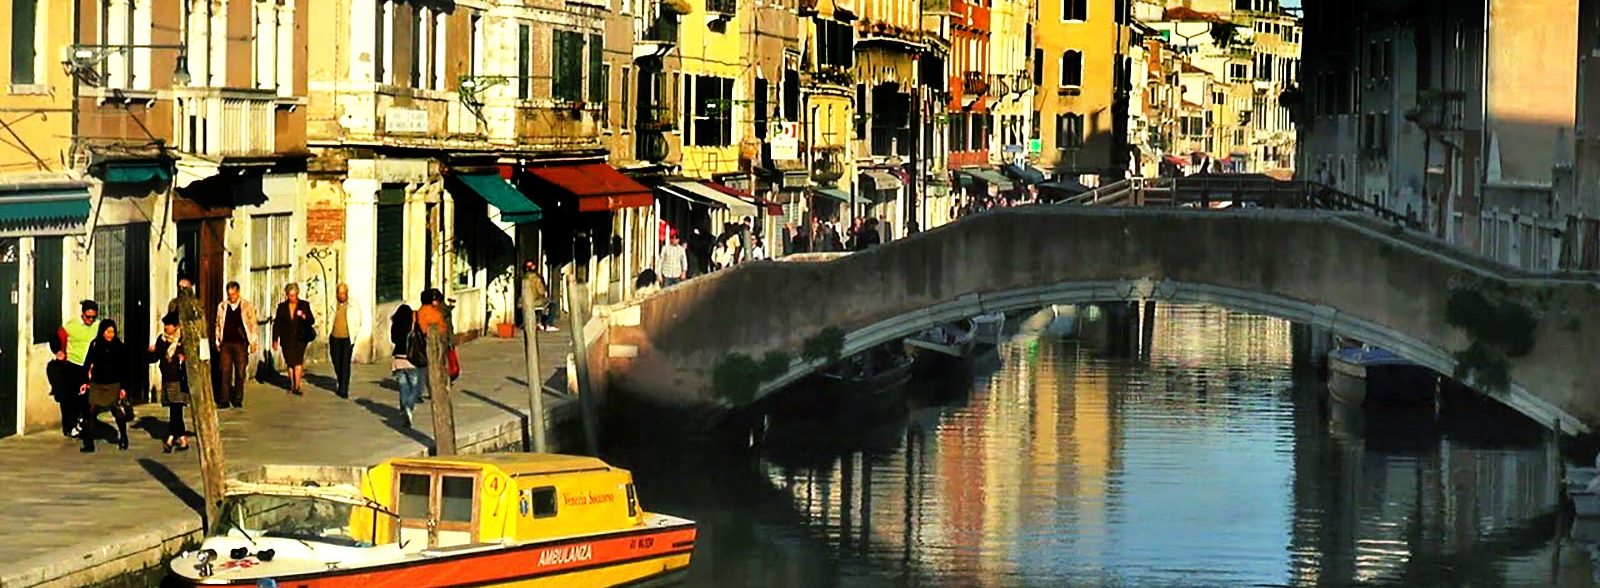 What is the best area to stay in Venice, Italy